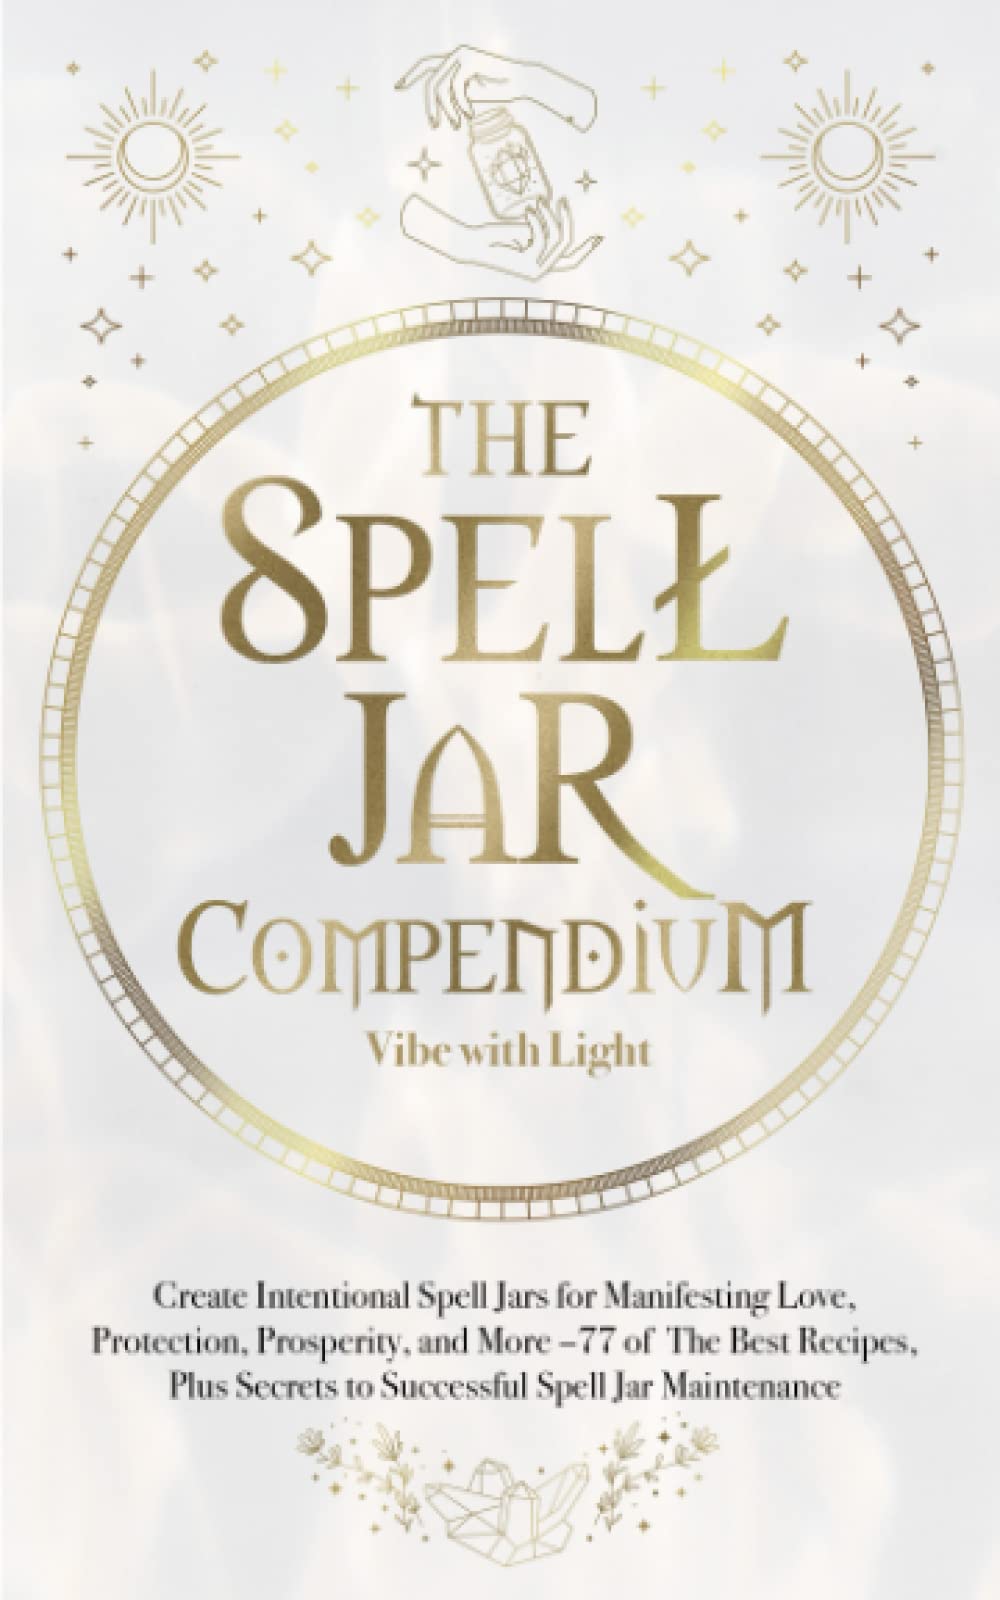 The Spell Jar Compendium: Create Intentional Spell Jars for Manifesting Love, Protection, Prosperity, and More: 77 of the Best Recipes, Plus Secrets ... Spell Jar Maintenance